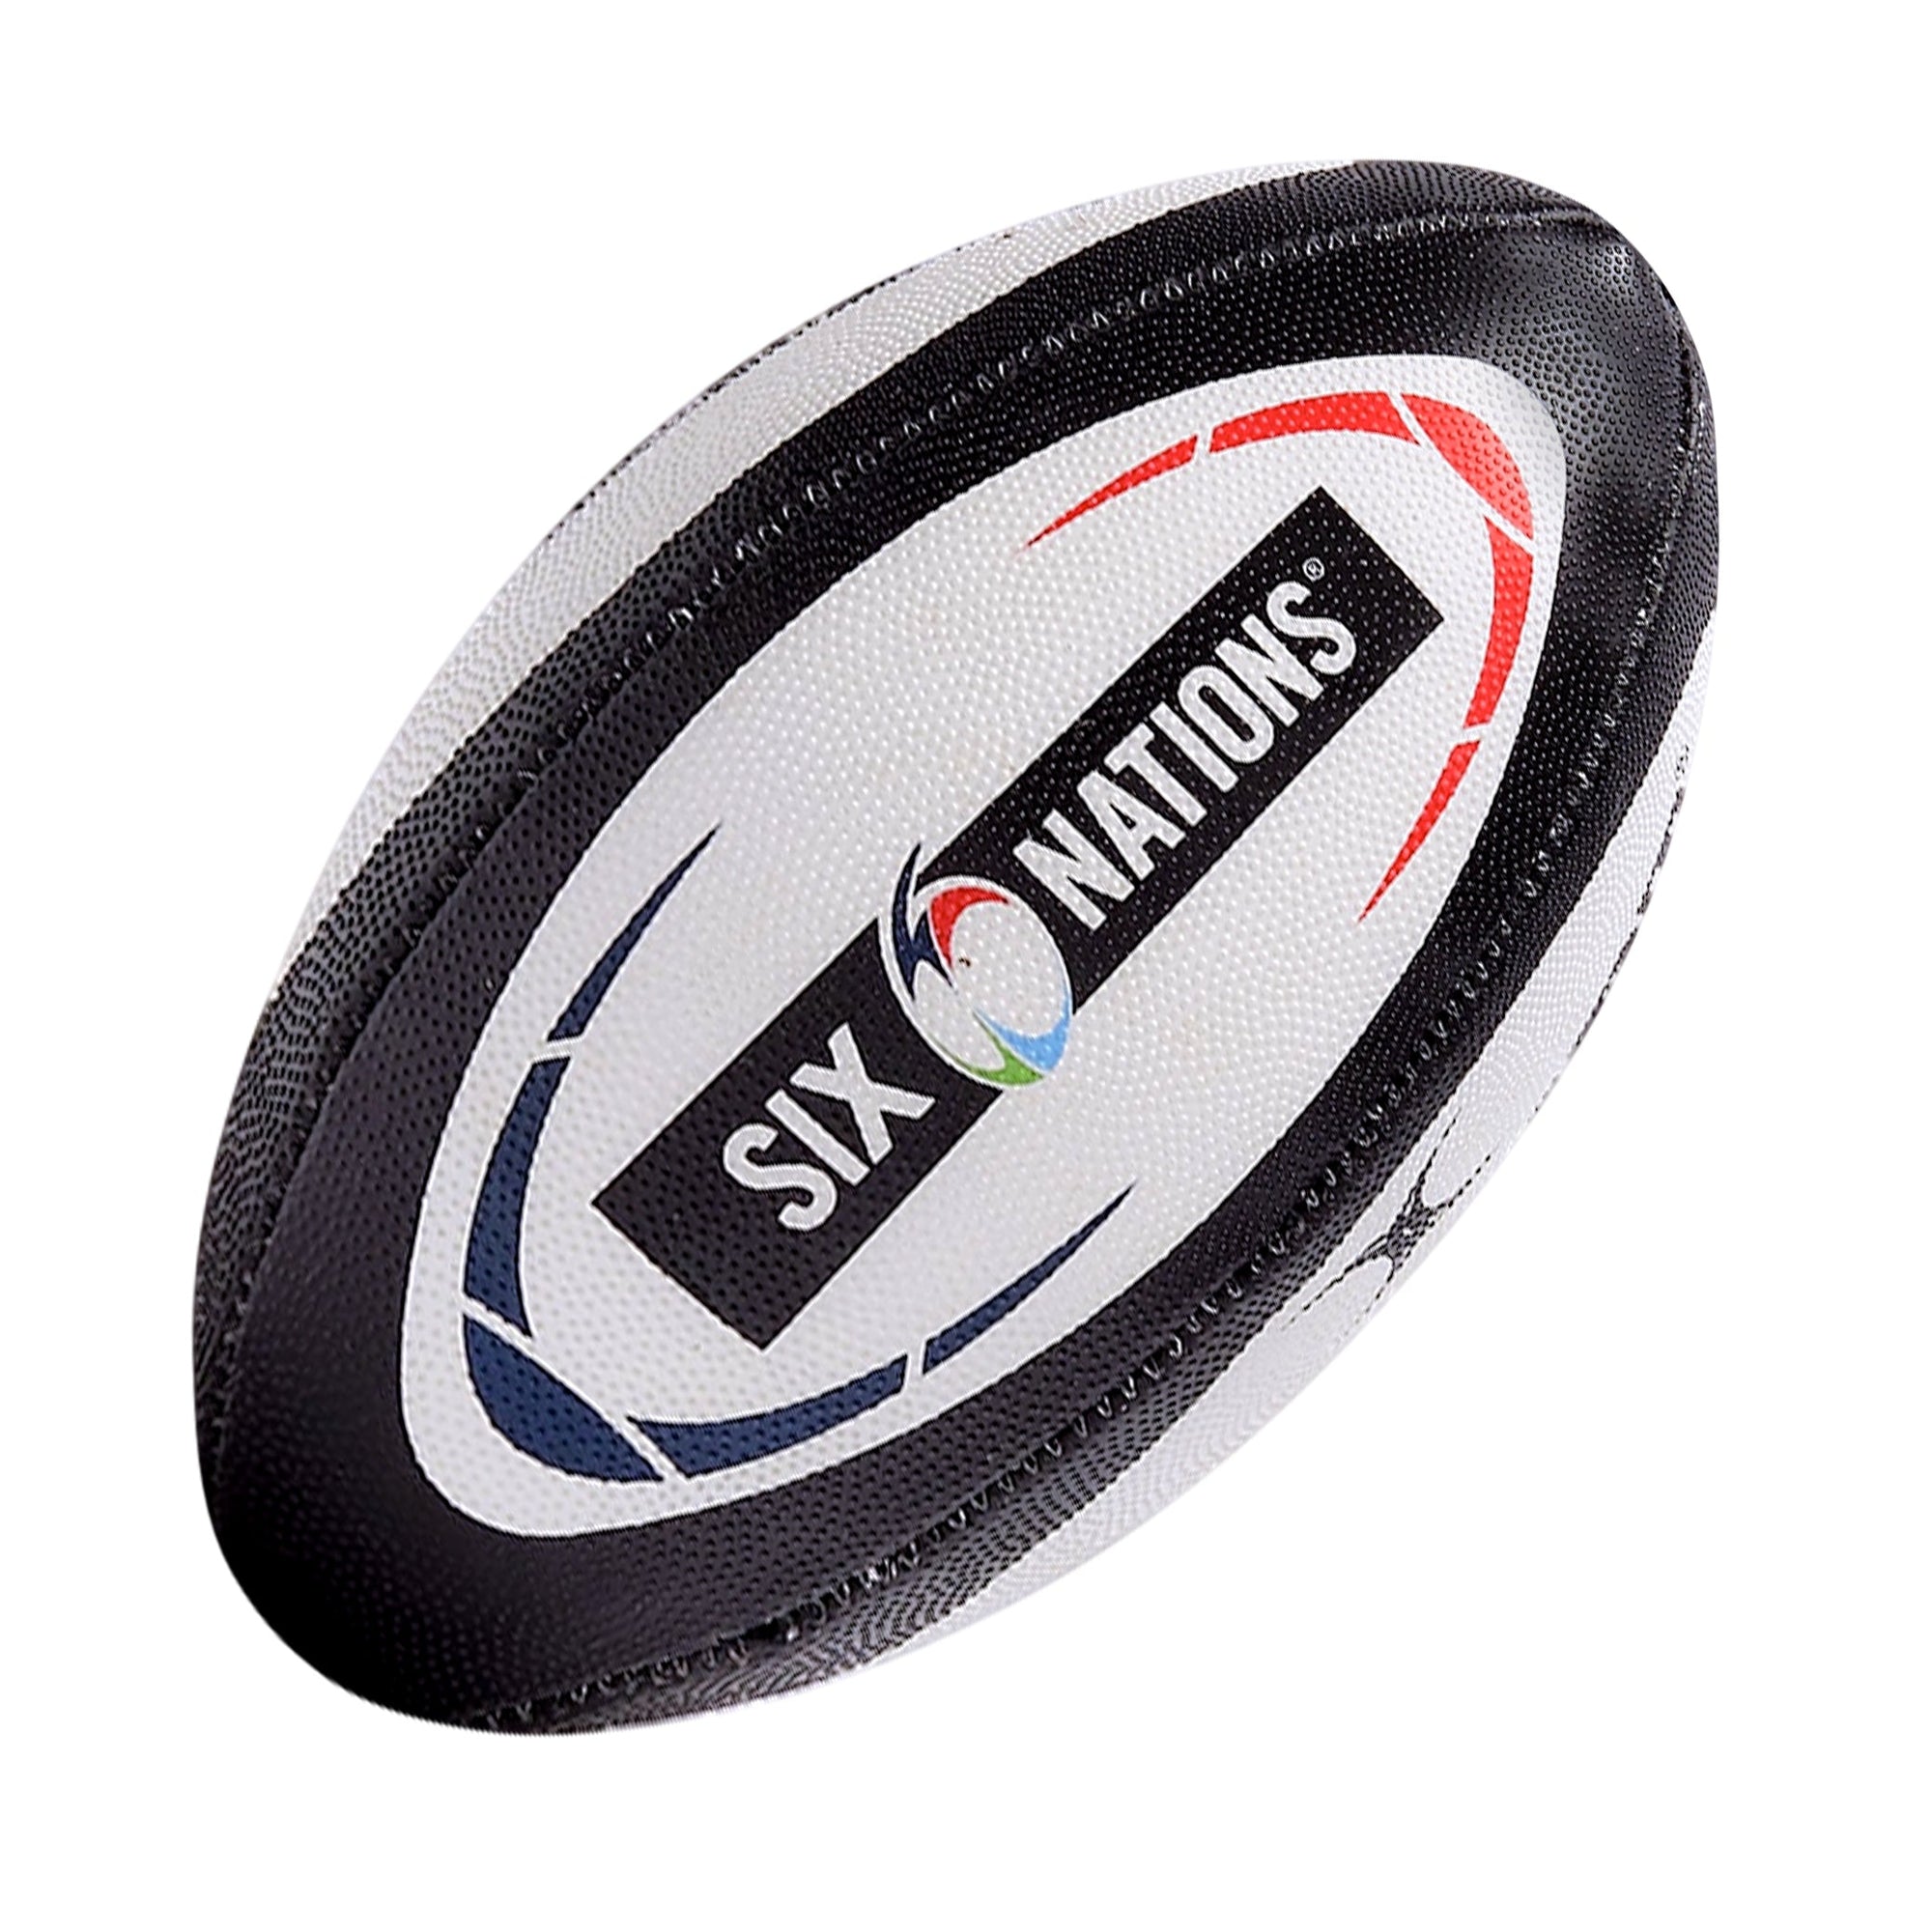 Rugby Imports Gilbert Six Nations Mini Rugby Ball